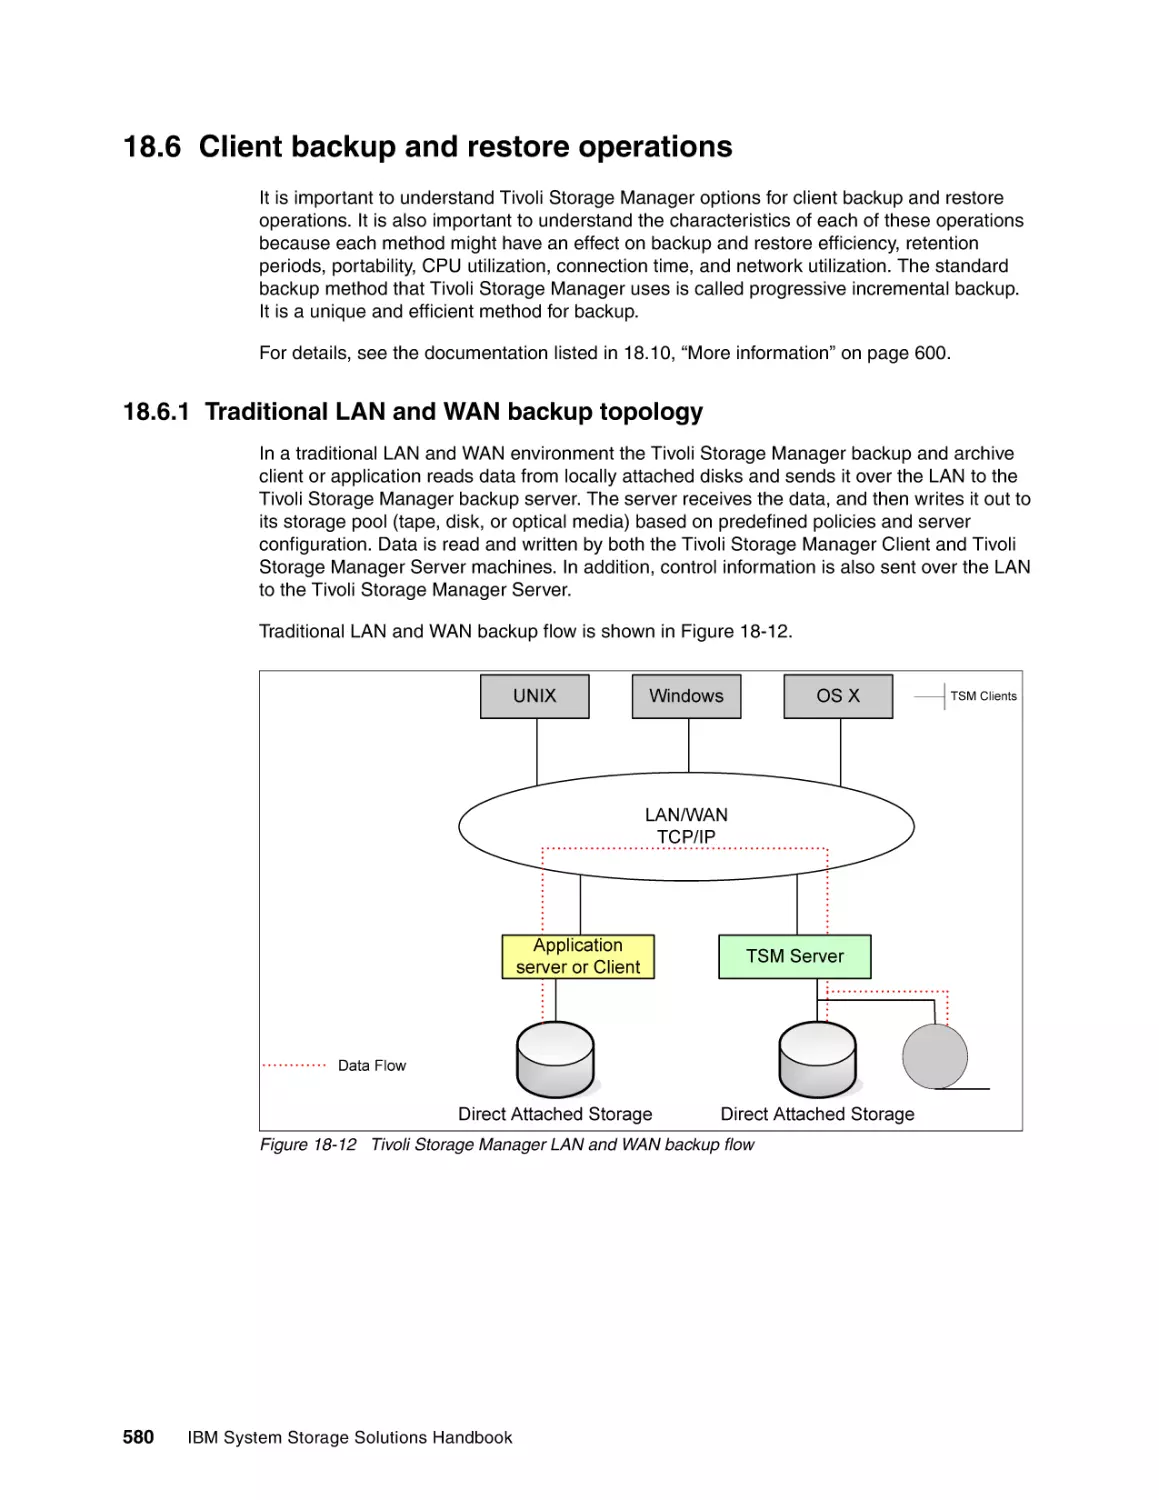 18.6 Client backup and restore operations
18.6.1 Traditional LAN and WAN backup topology